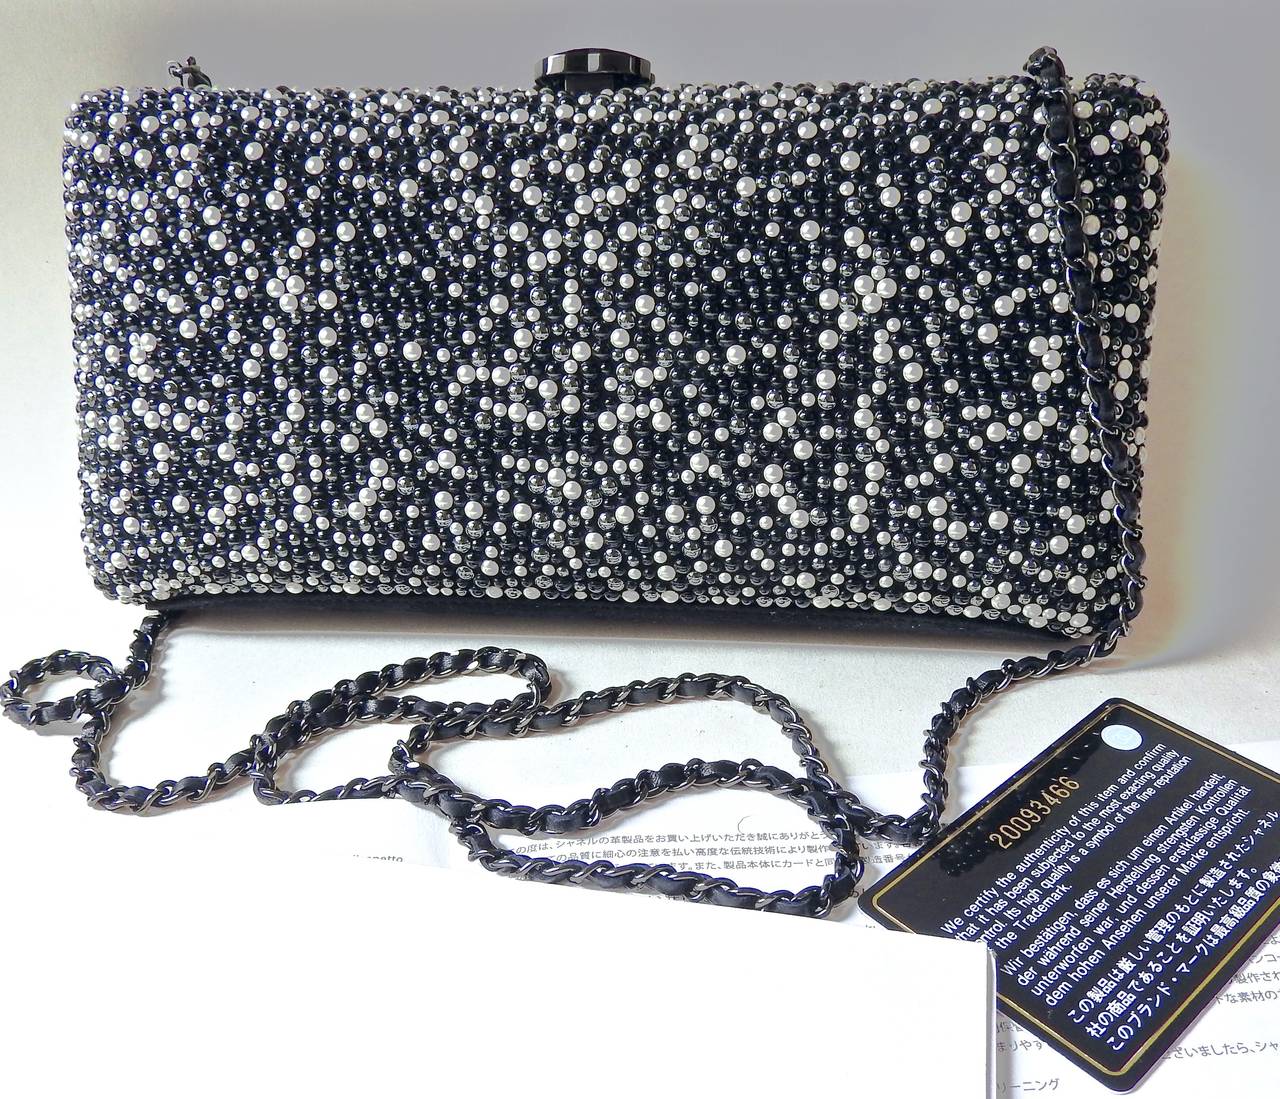 This Chanel pearled chain clutch bag is from 2014 Pre-Fall collection. 
 Sumptuously embellished with finest quality of grey and creamy white pearls and black beads. 
Soft lambskin lining with suede leather bottom.
3 toned pearls give this clutch